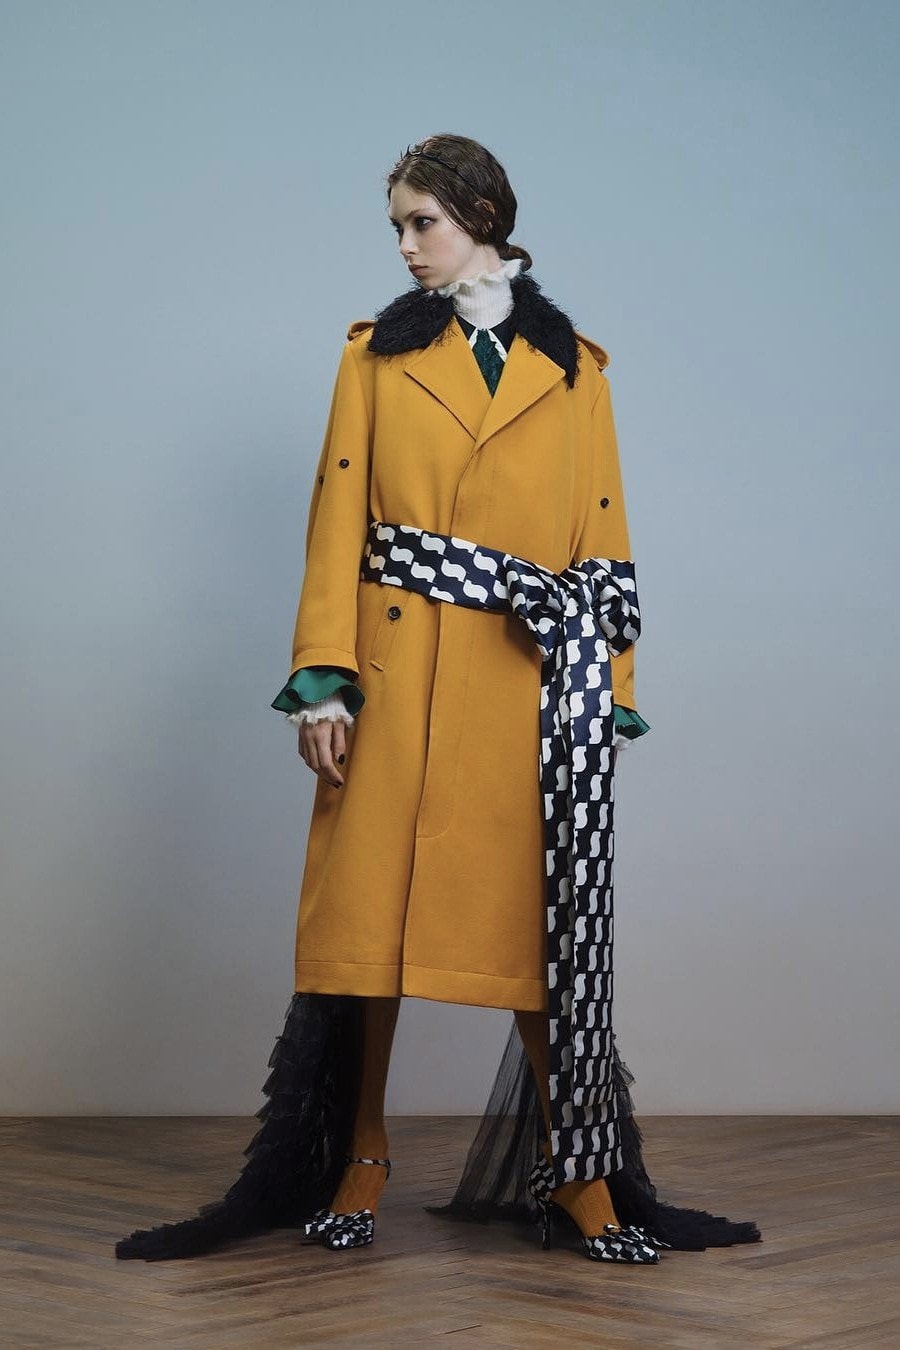 UNDERCOVER Fall Winter 2019 Collection Jacket Yellow Black White